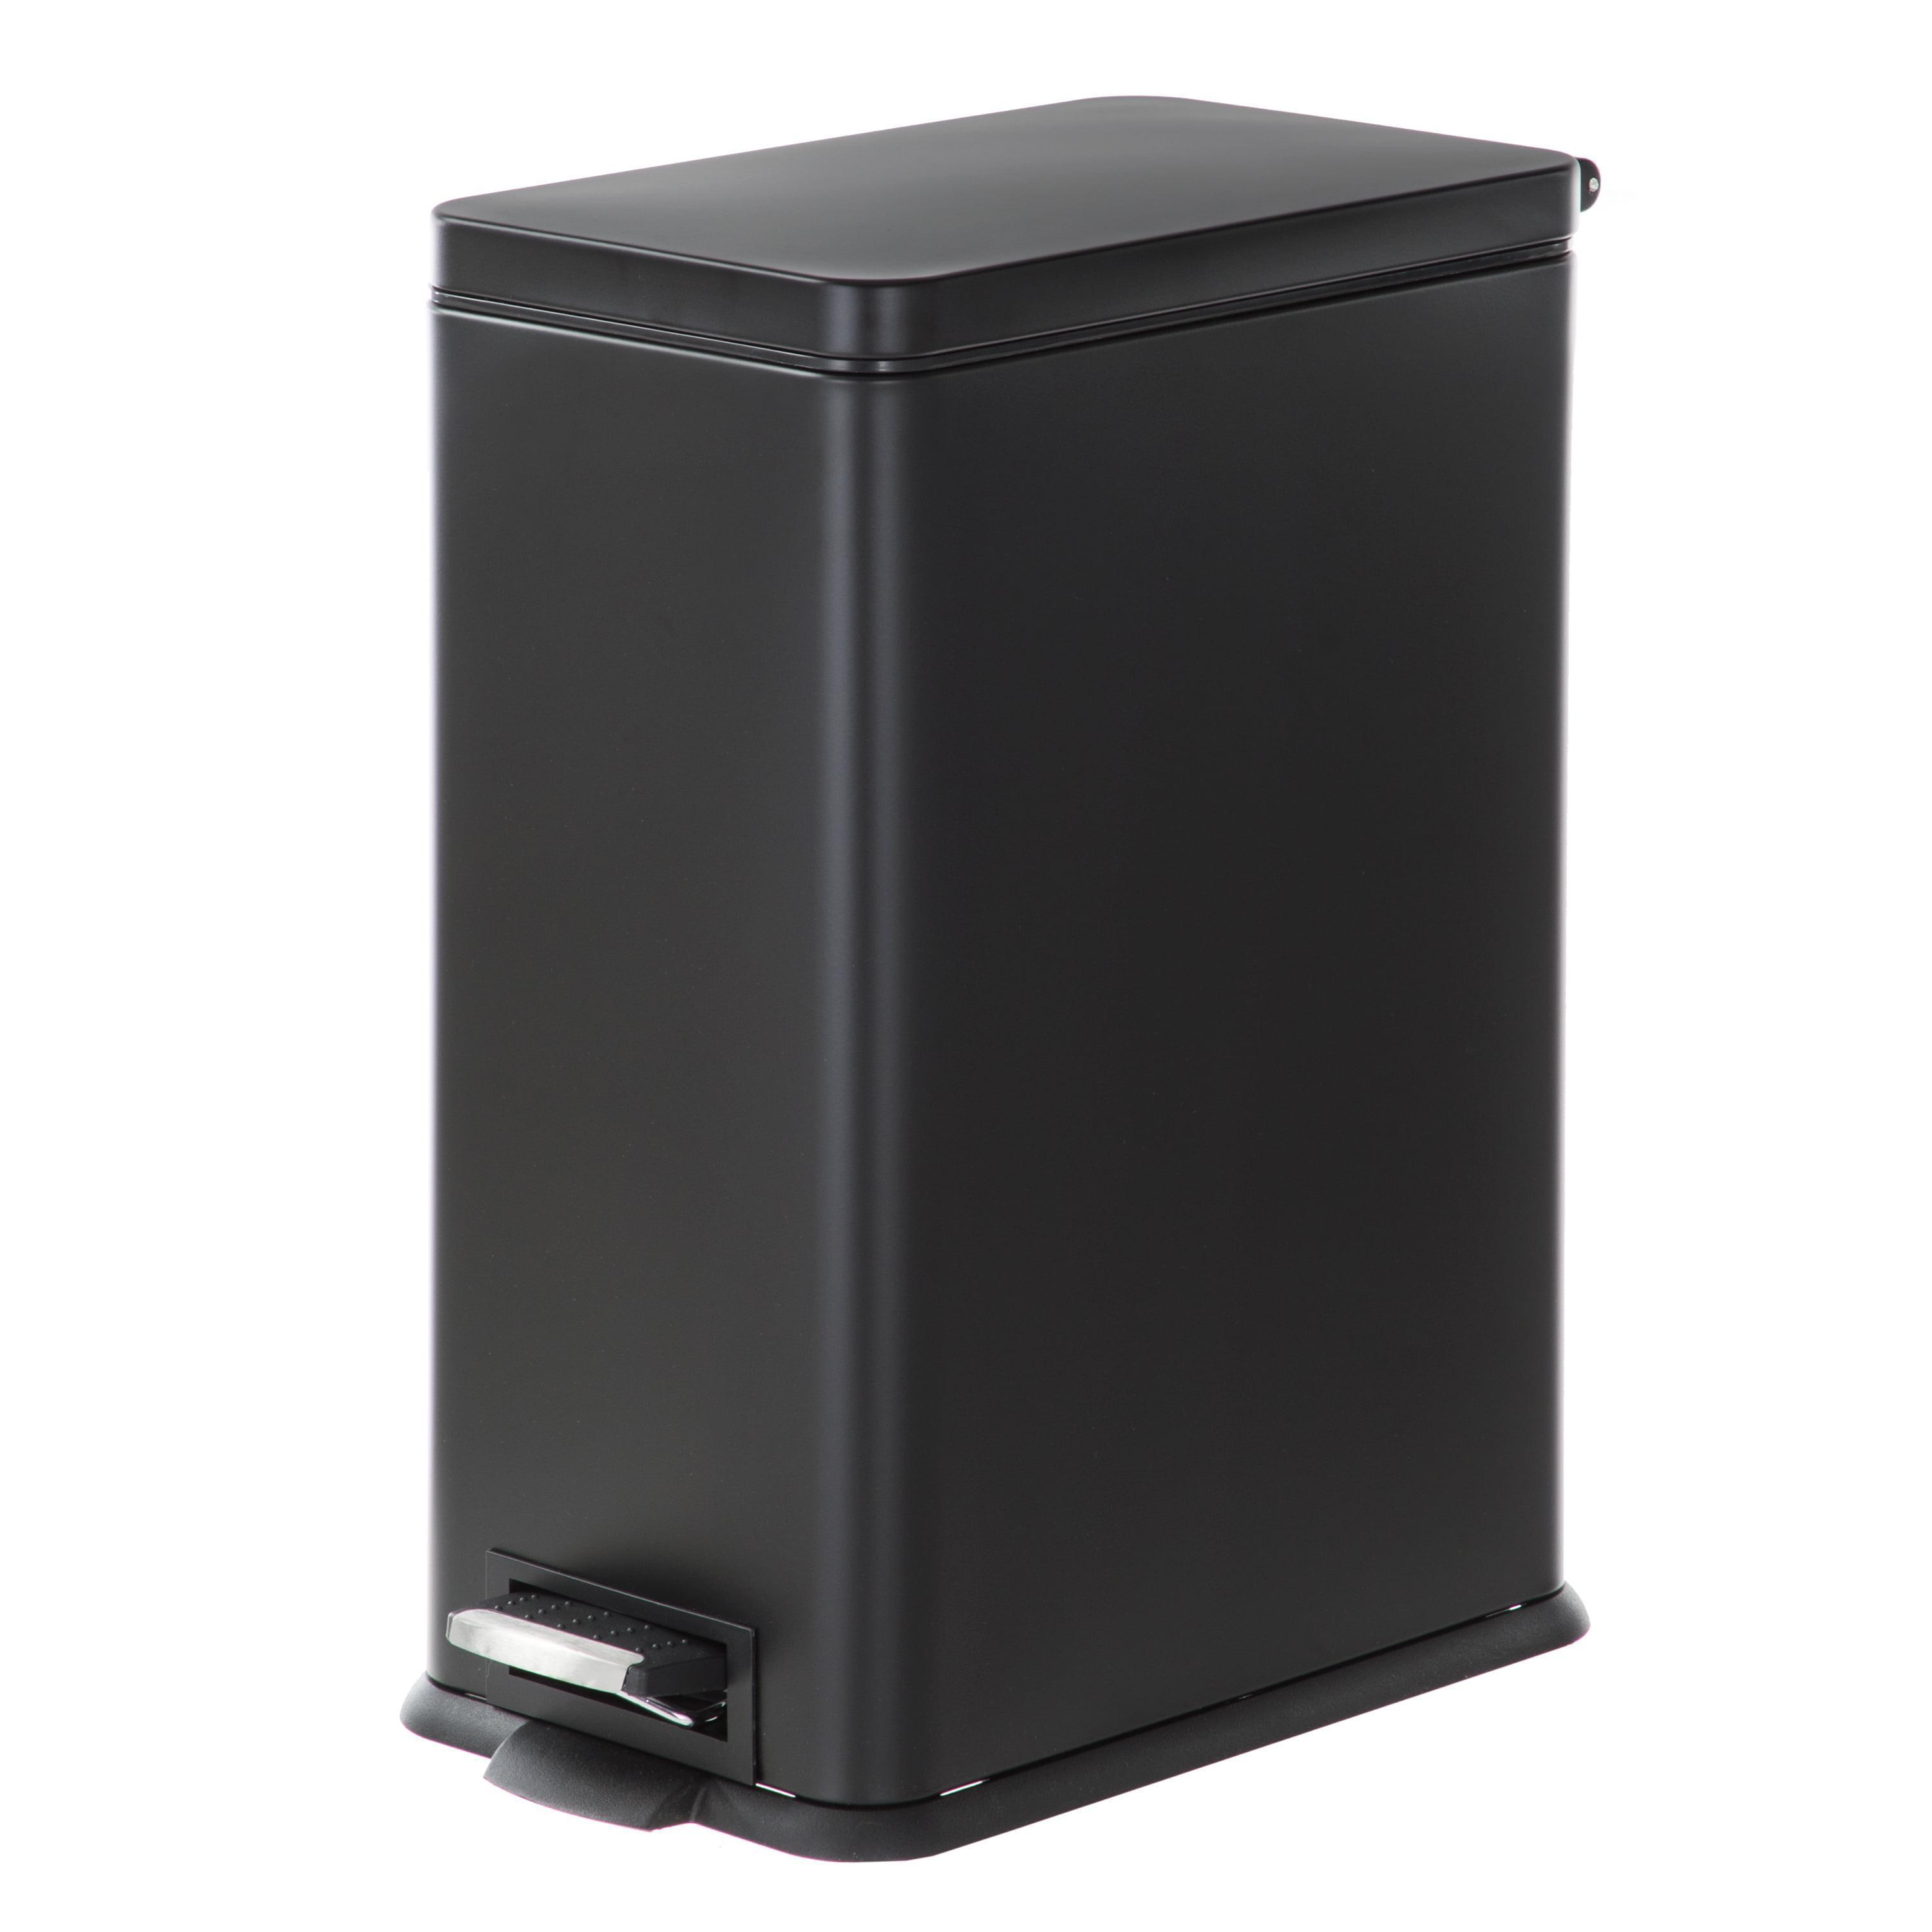 Mainstays Rectangle Pedal Bin Kitchen Garbage Can, 7.9 gal, Multiple Colors Sale